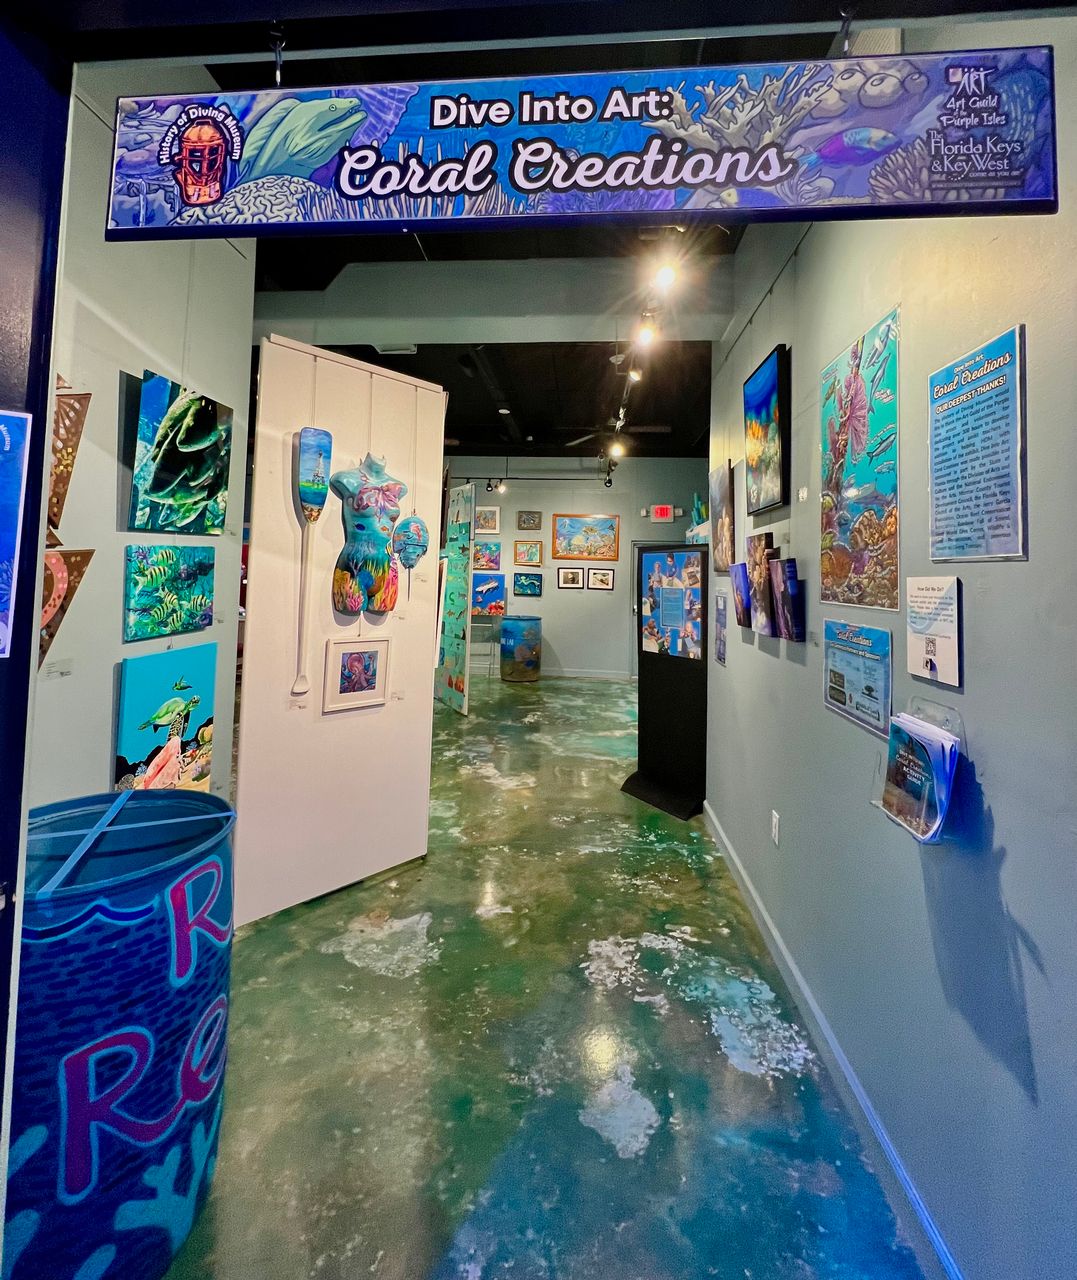 The Dive Into Art: Coral Creations exhibit, on display at the History of Diving Museum, includes works of art themed to inspire coral conservation. Photos by JoNell Modys